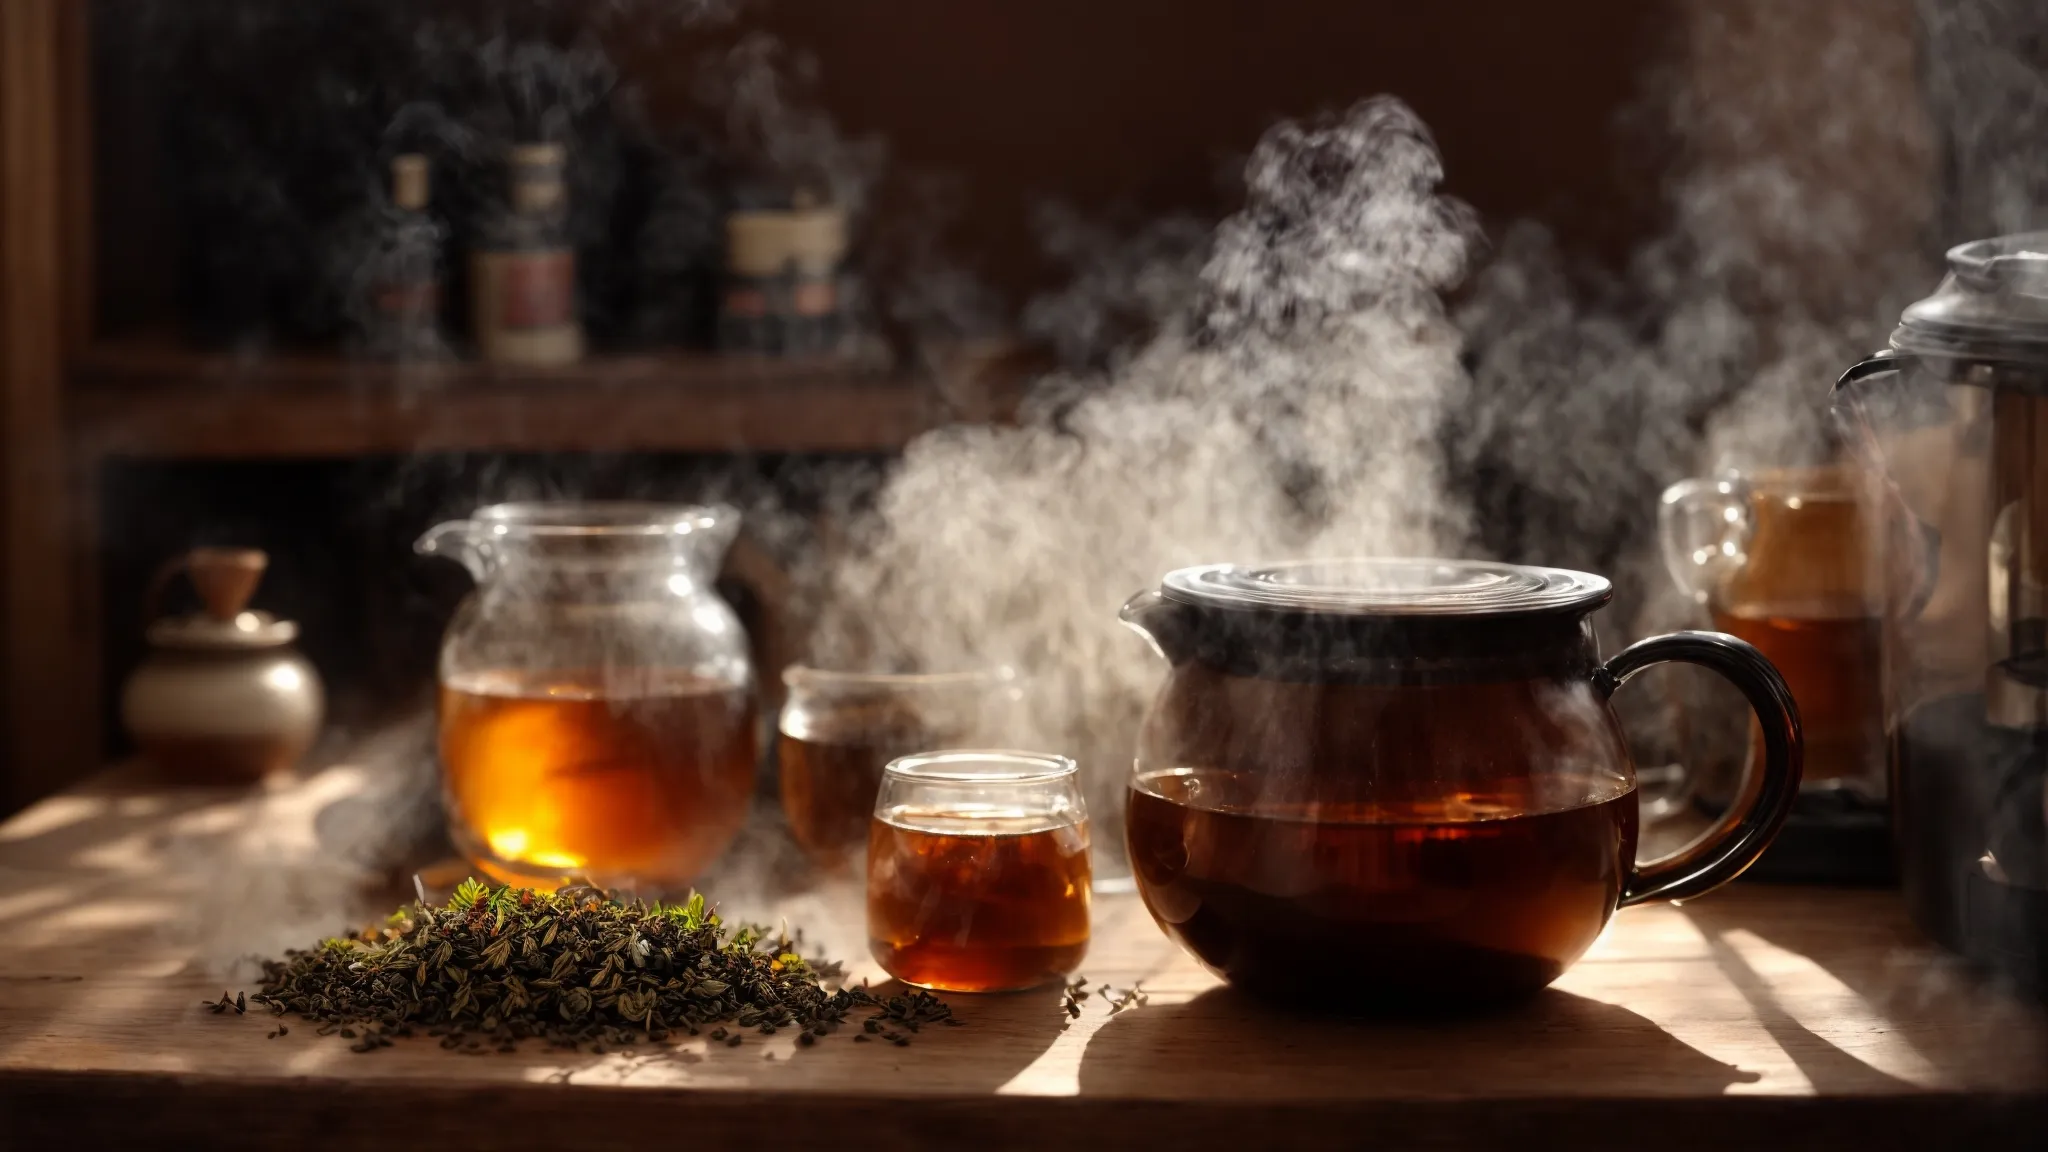 a steaming mug of herbal tea rests on a wooden table surrounded by assorted jars of dried herbs and a warm, glowing humidifier in the background.